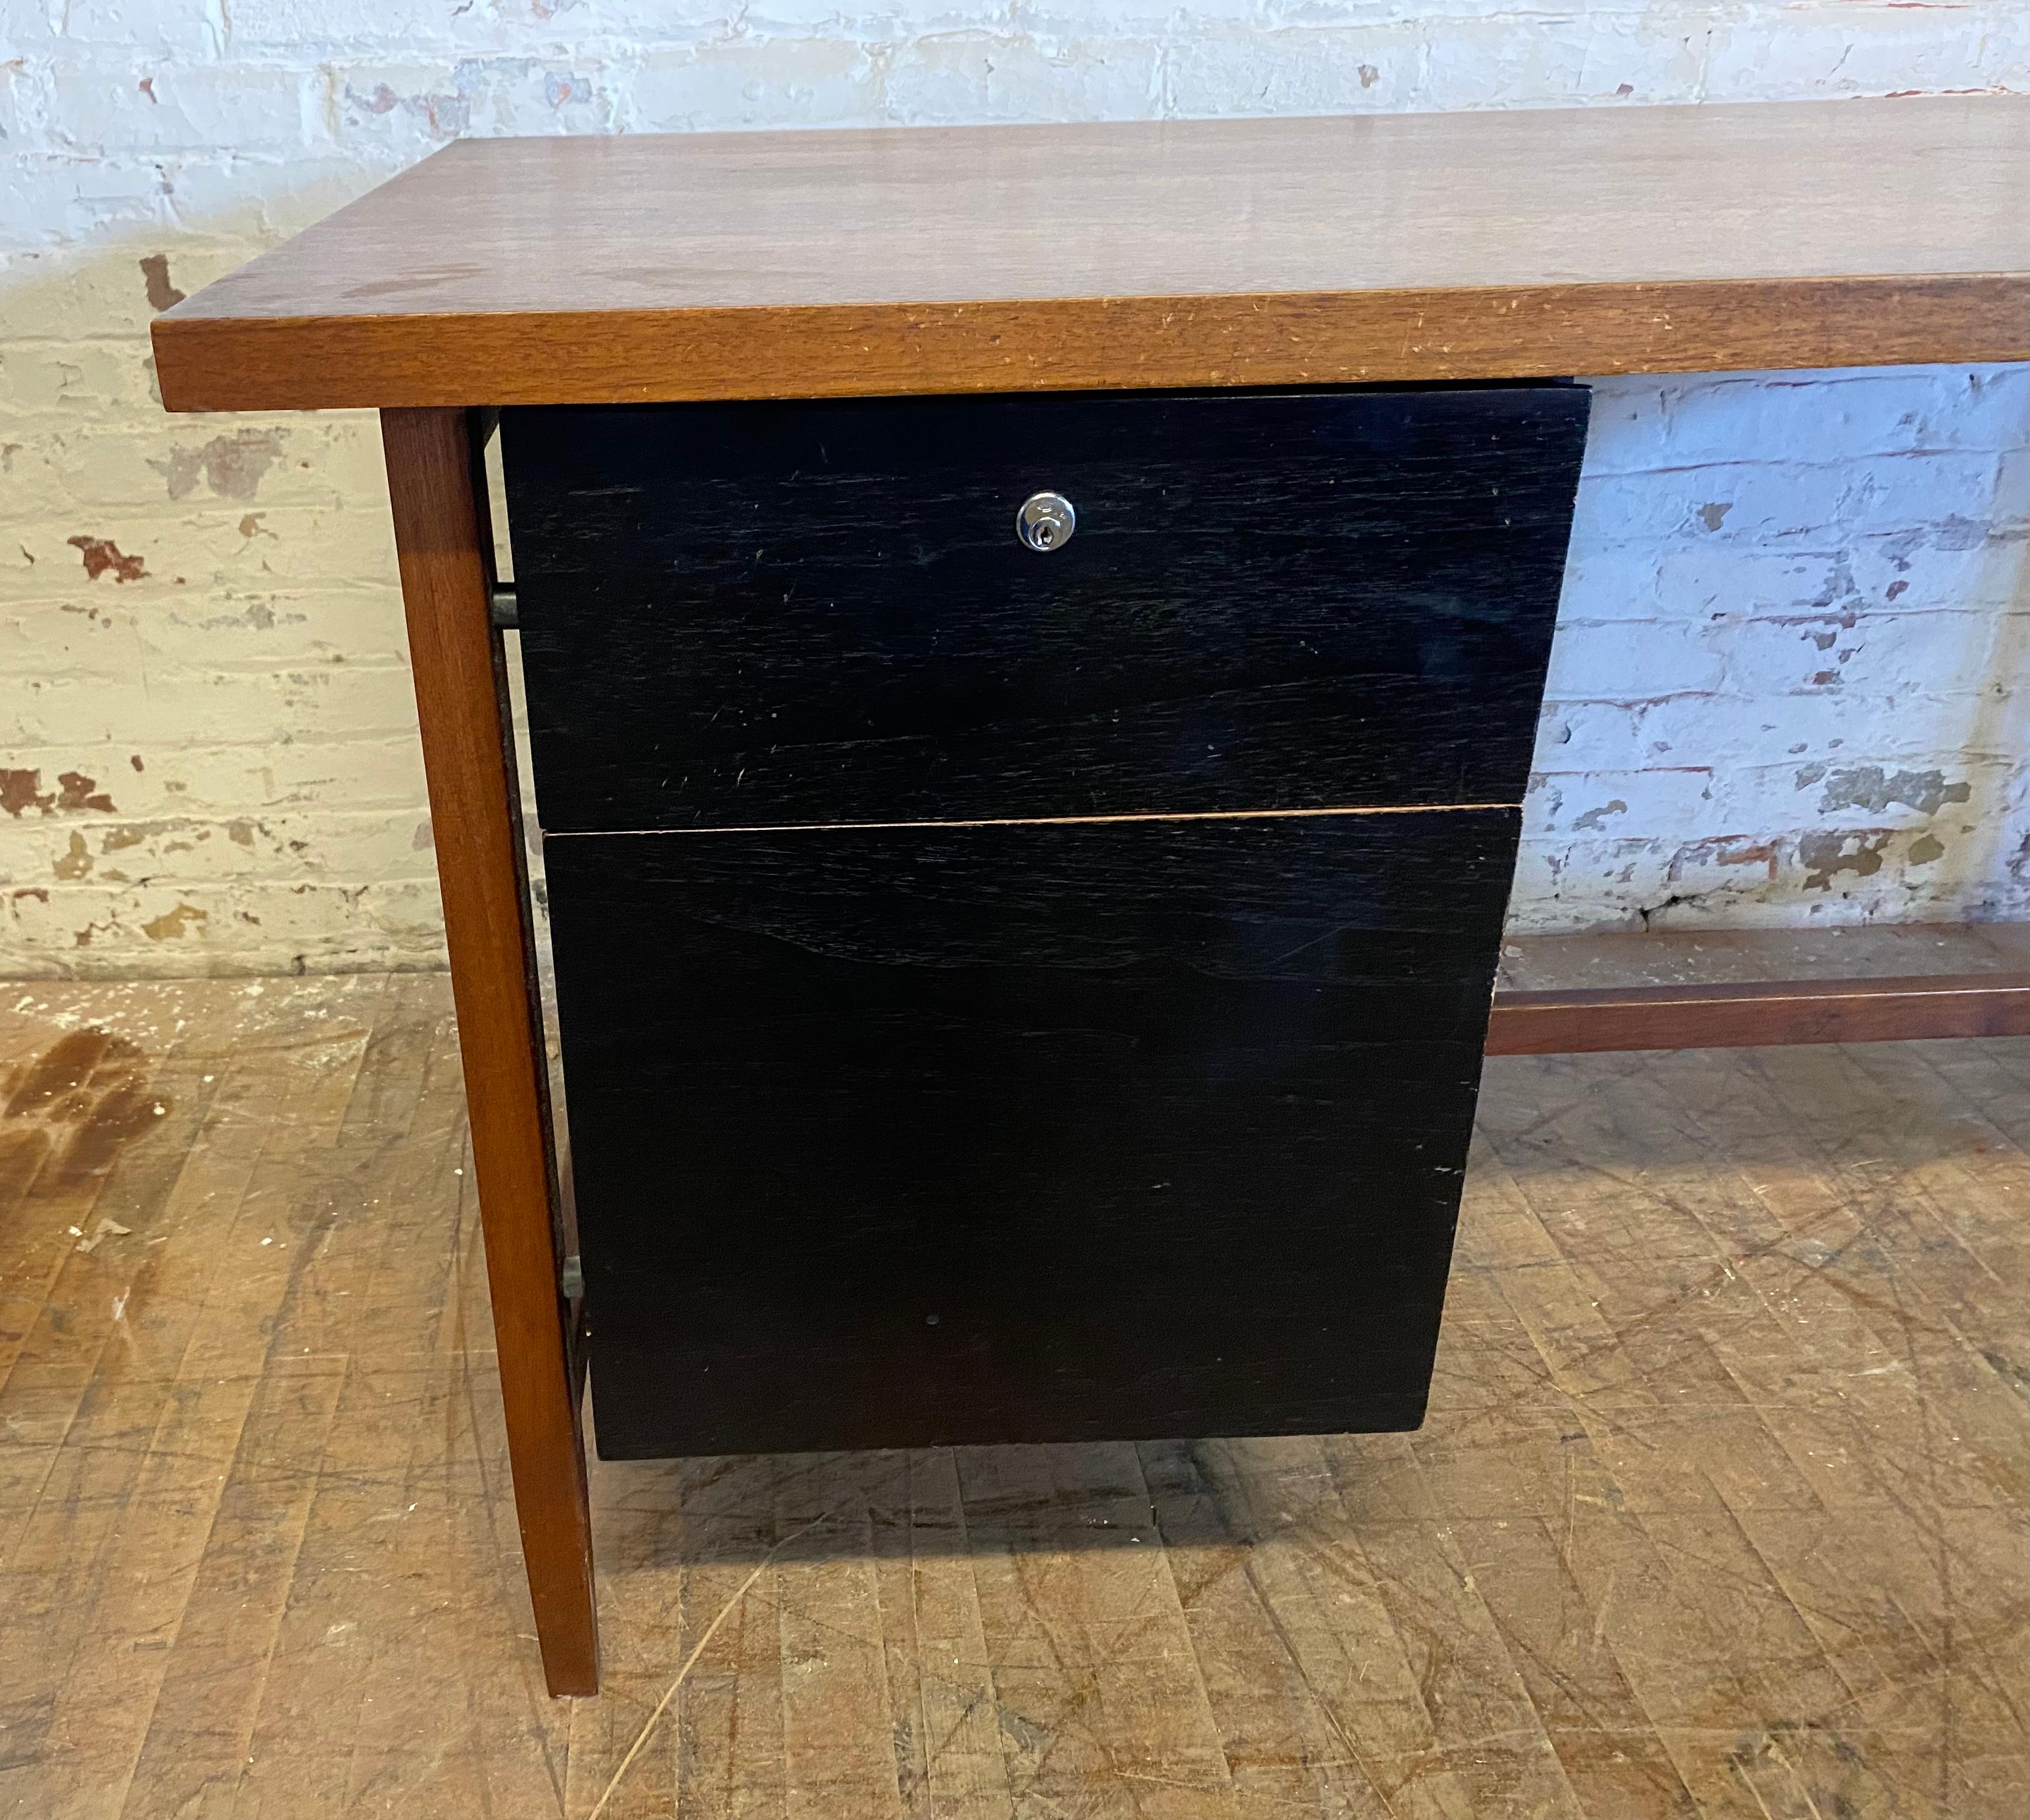 Early production Florence Knoll Desk, Classic Modernist design, Knoll New York In Good Condition For Sale In Buffalo, NY